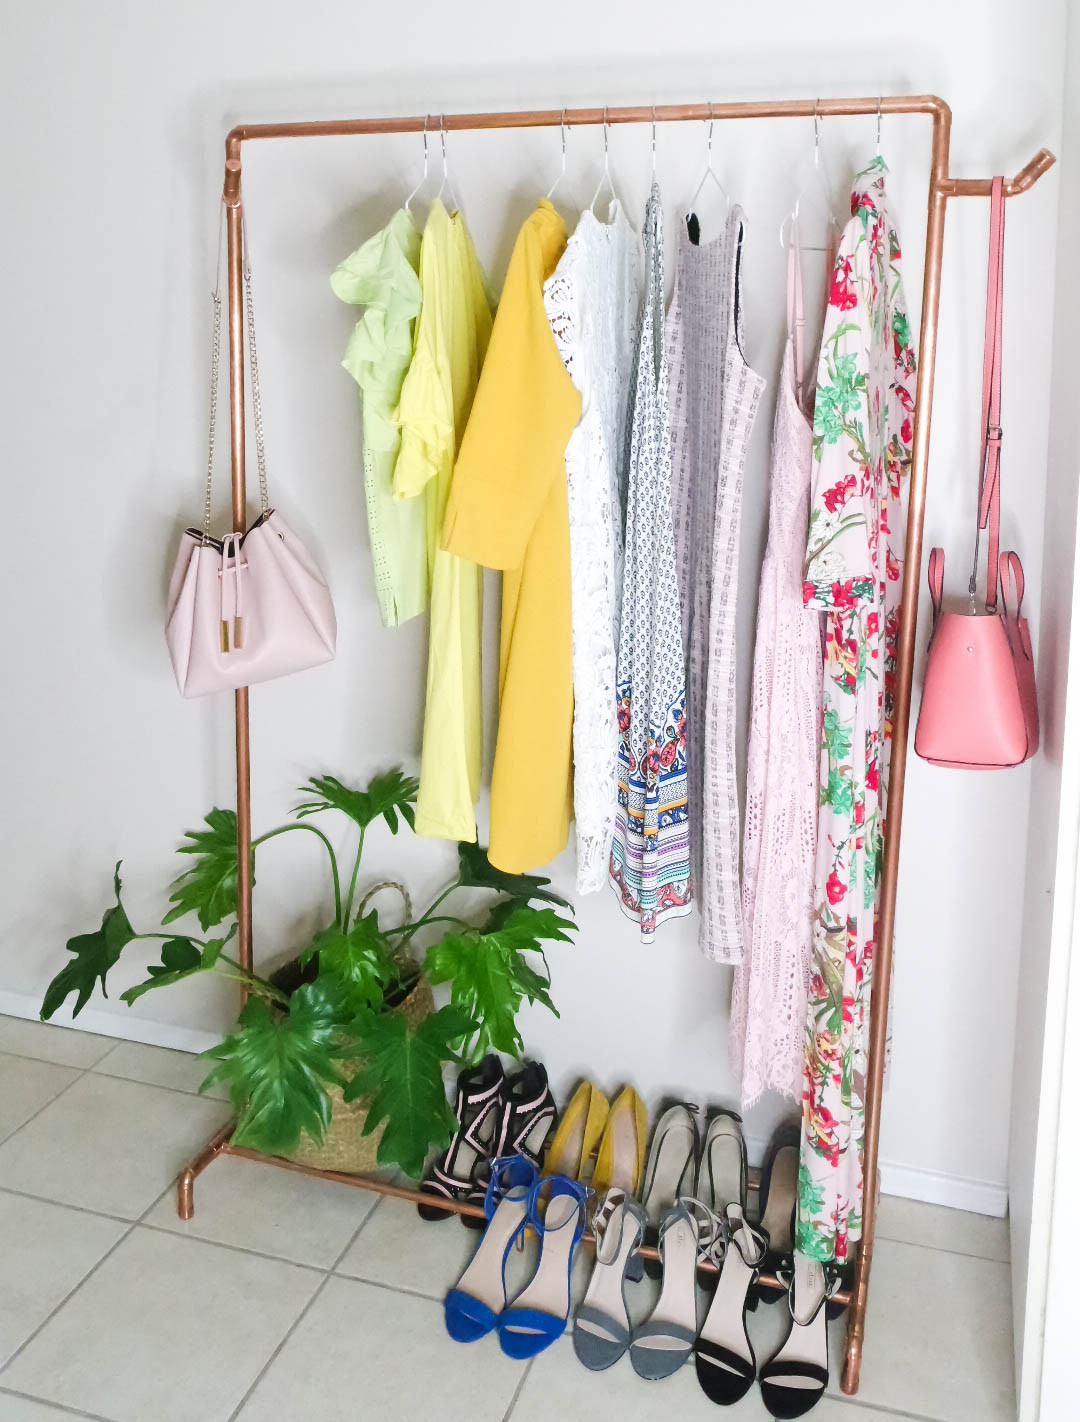 Pipe Clothes Rack DIY
 diy copper pipe clothing rack ByLungi